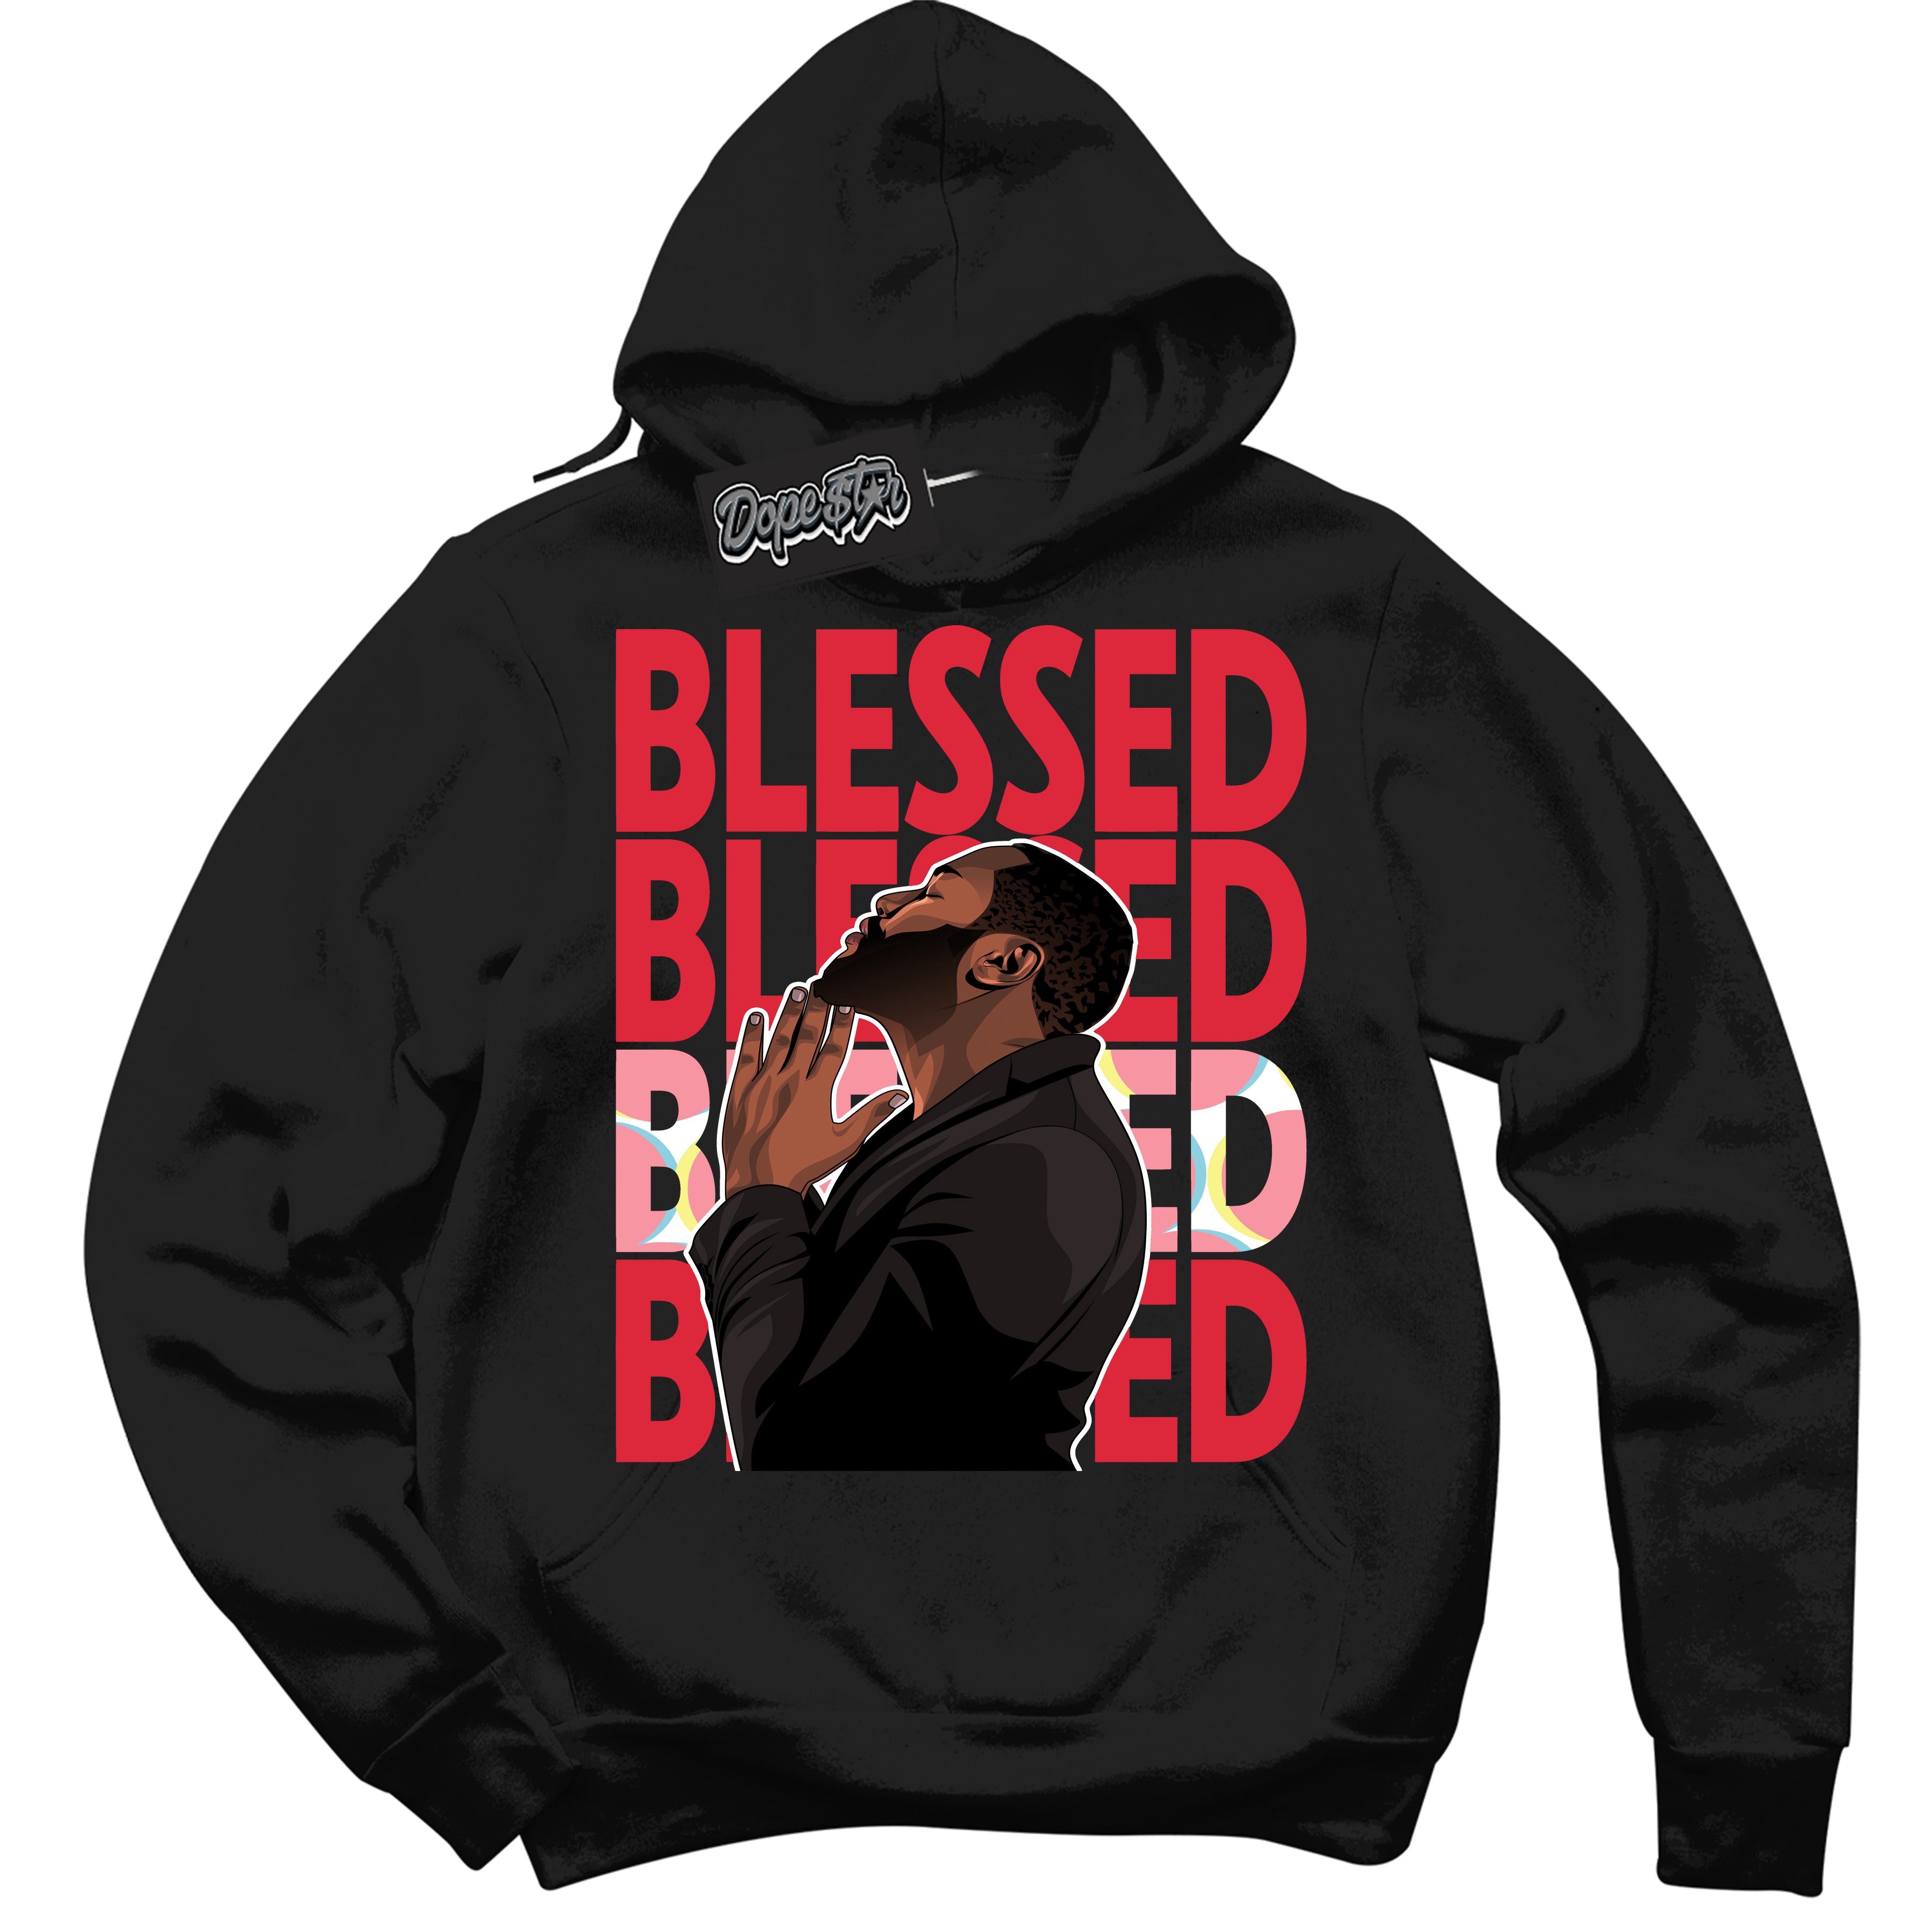 Cool Black Graphic DopeStar Hoodie with “ God Blessed “ print, that perfectly matches Spider-Verse 1s sneakers